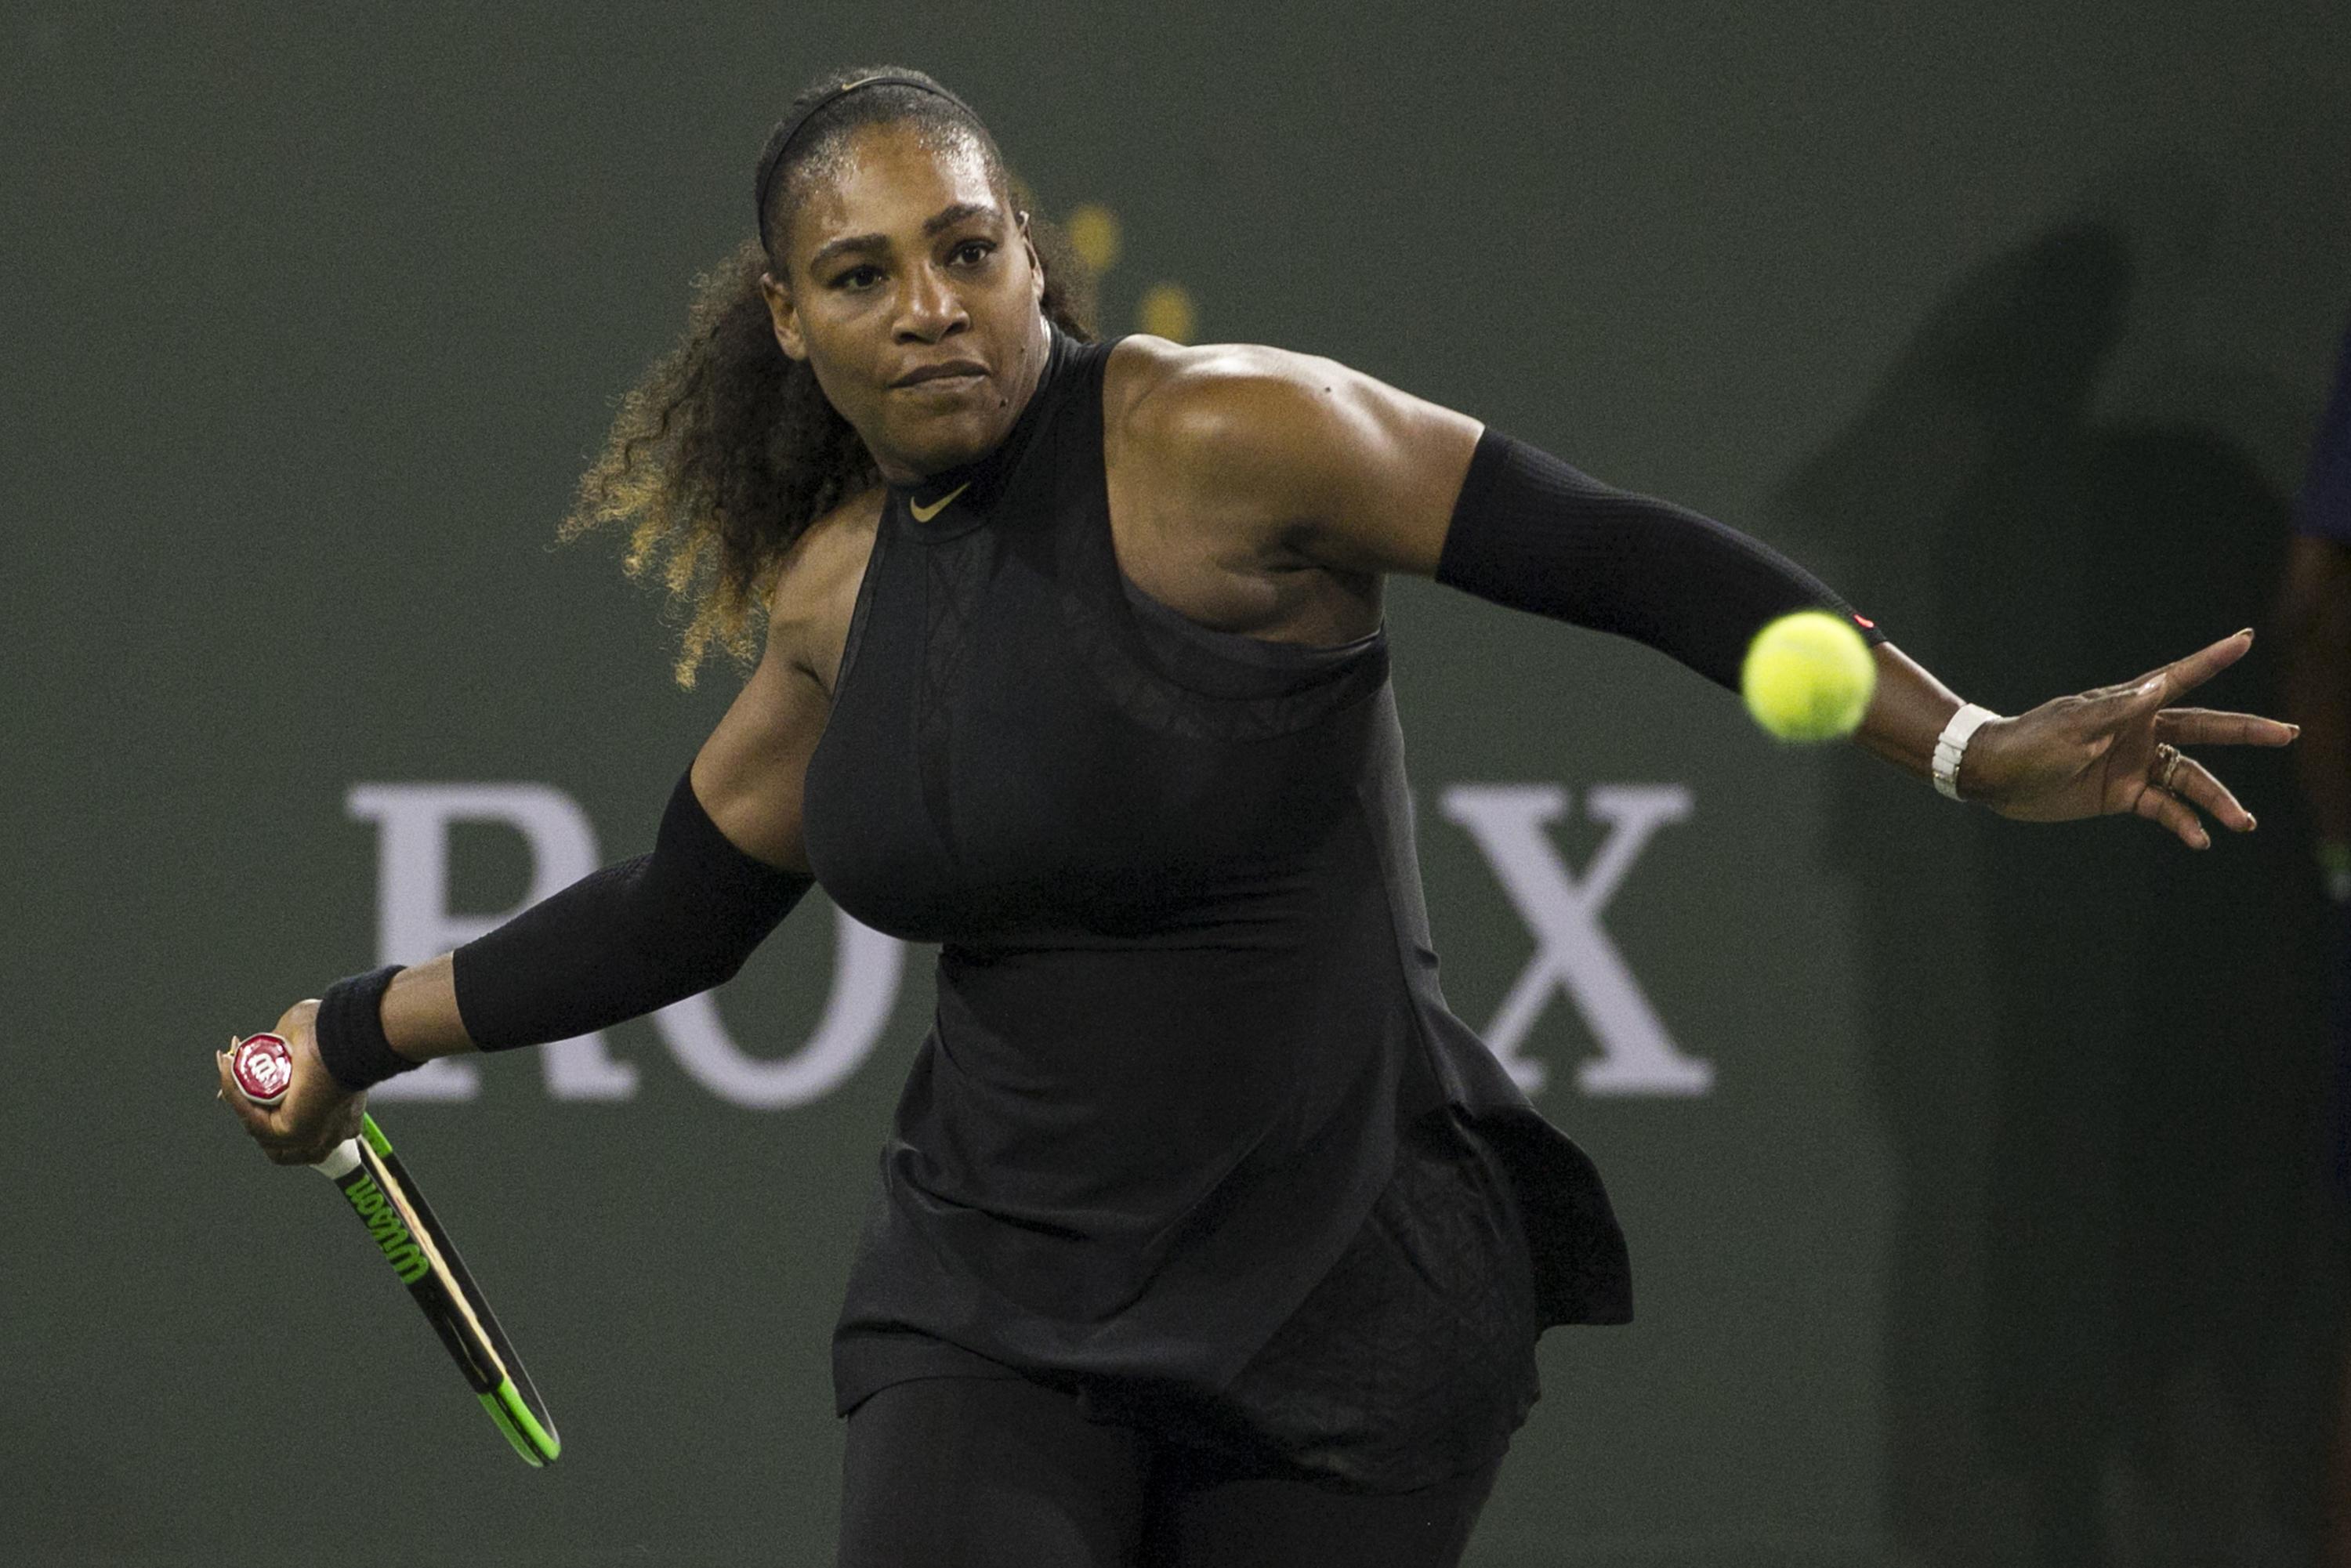 Serena Williams wins 1st match in comeback at Indian Wells | The Spokesman-Review3000 x 2001